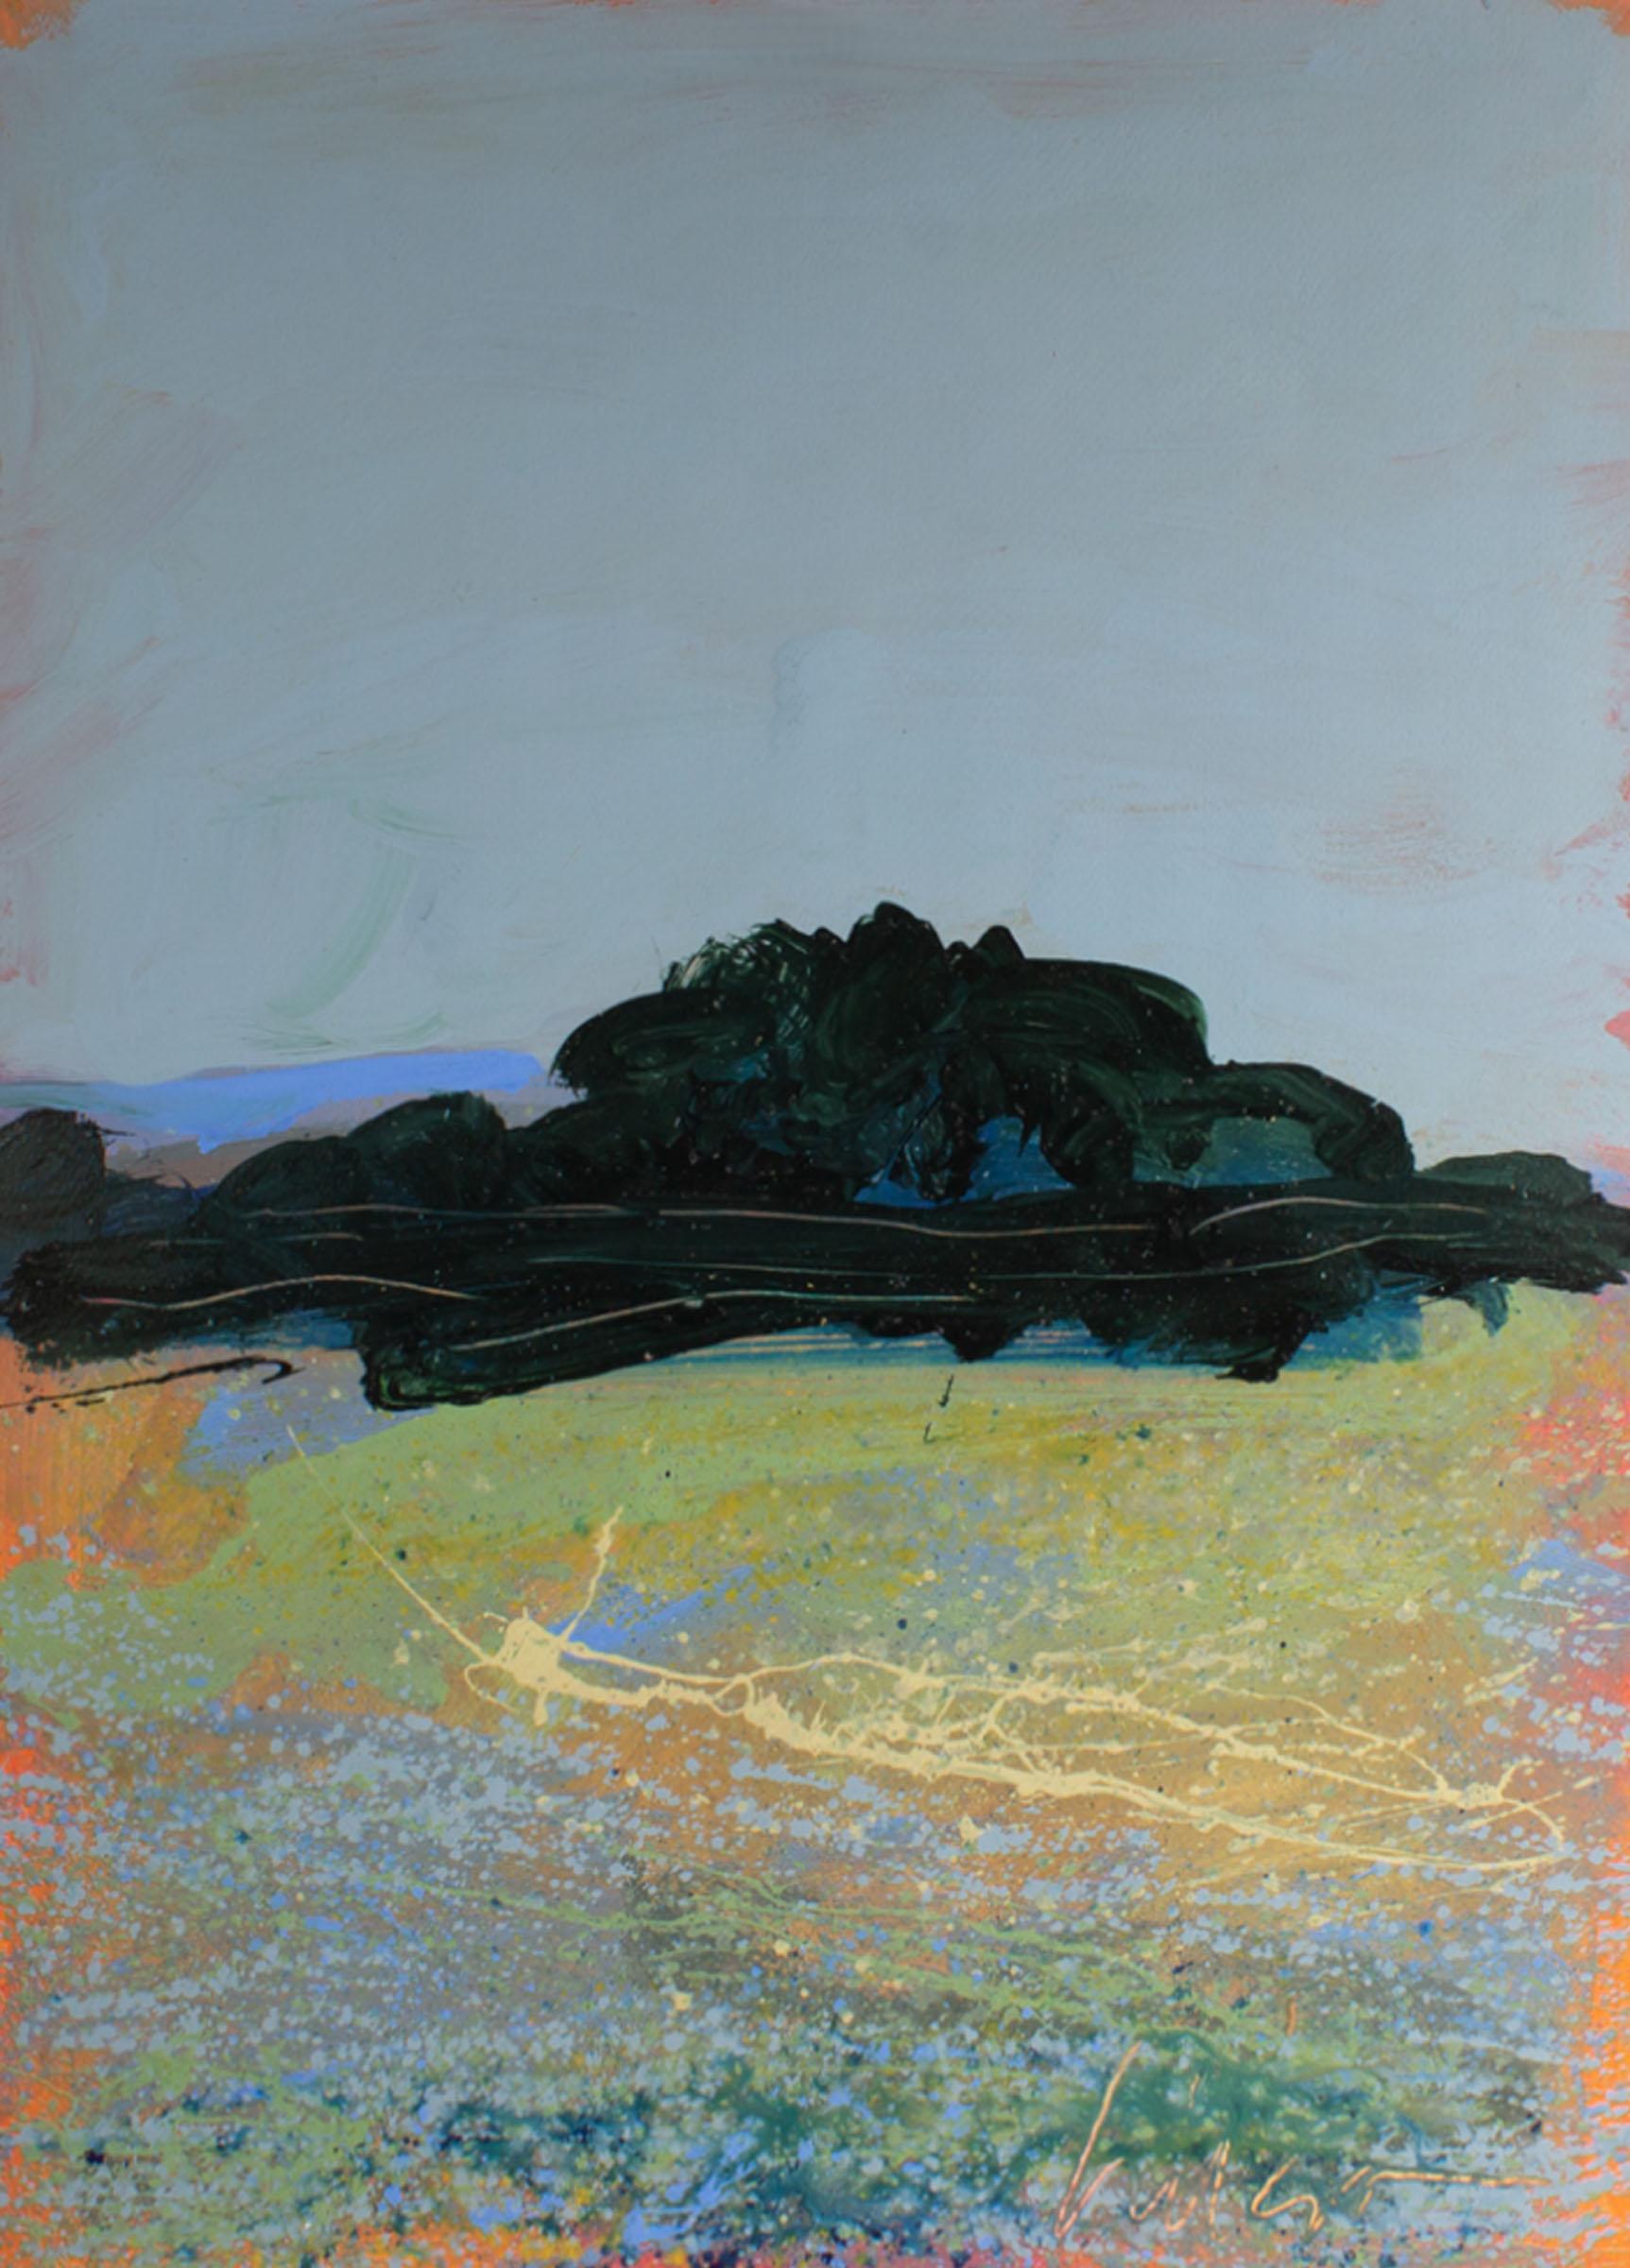 An abstract acrylic on paper mountainous landscape painting by American artist Harry Hilson (1935-2004). Gestural lines come together to create a vibrant abstract landscape with a mountain and trees in the background and a flowery field in the